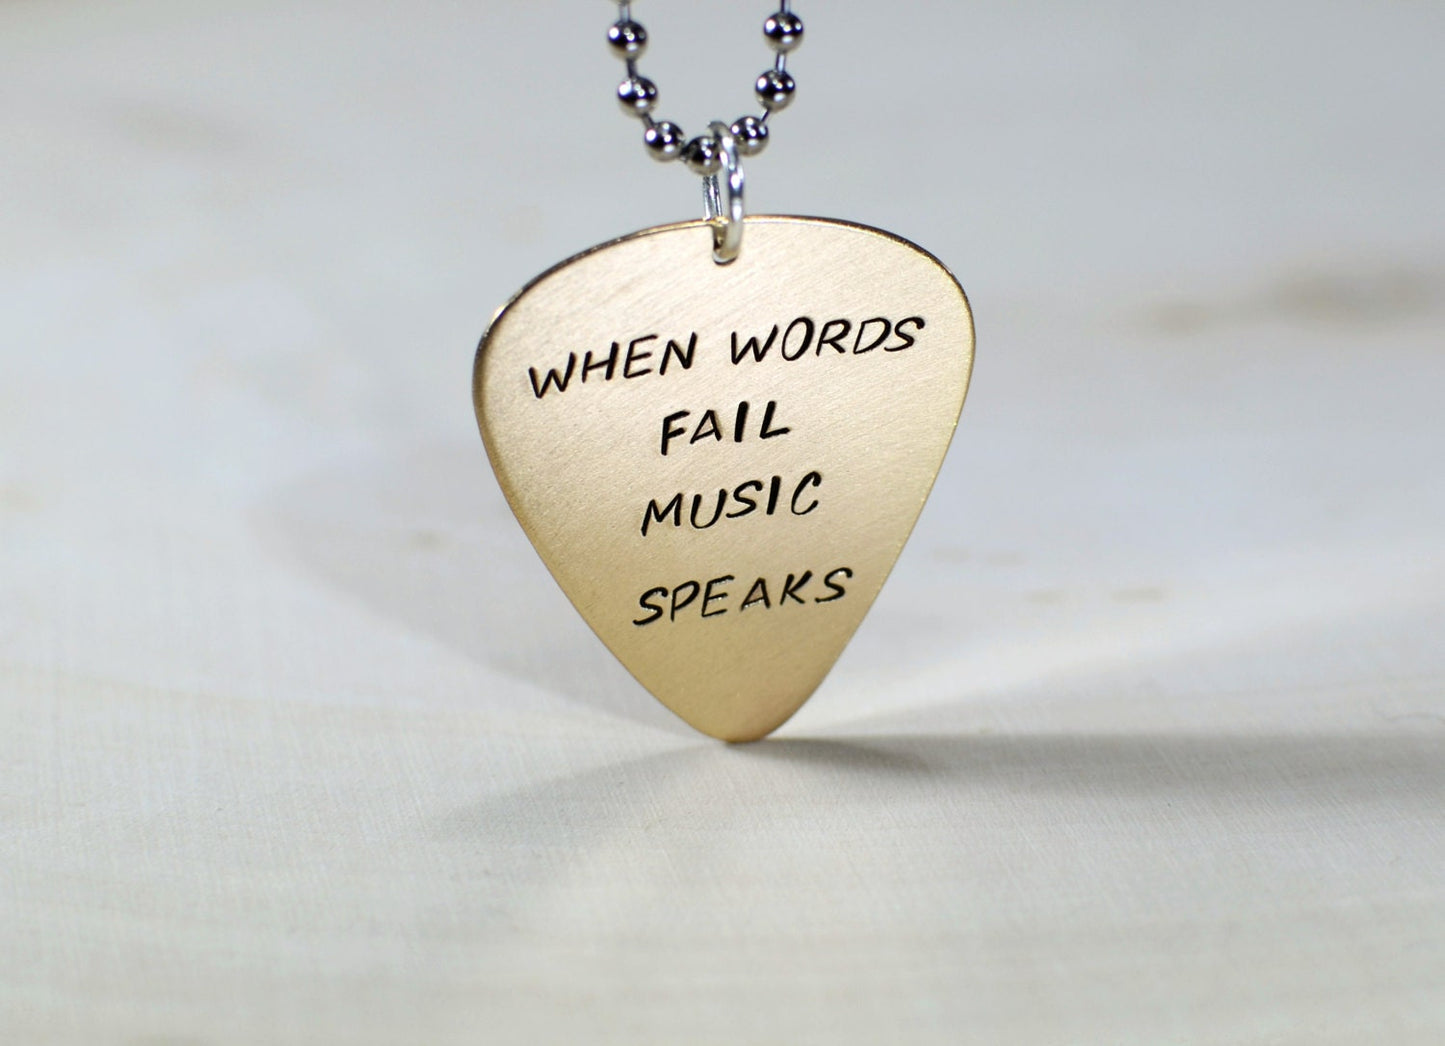 Bronze guitar pick necklace stamped with When words fail music speaks